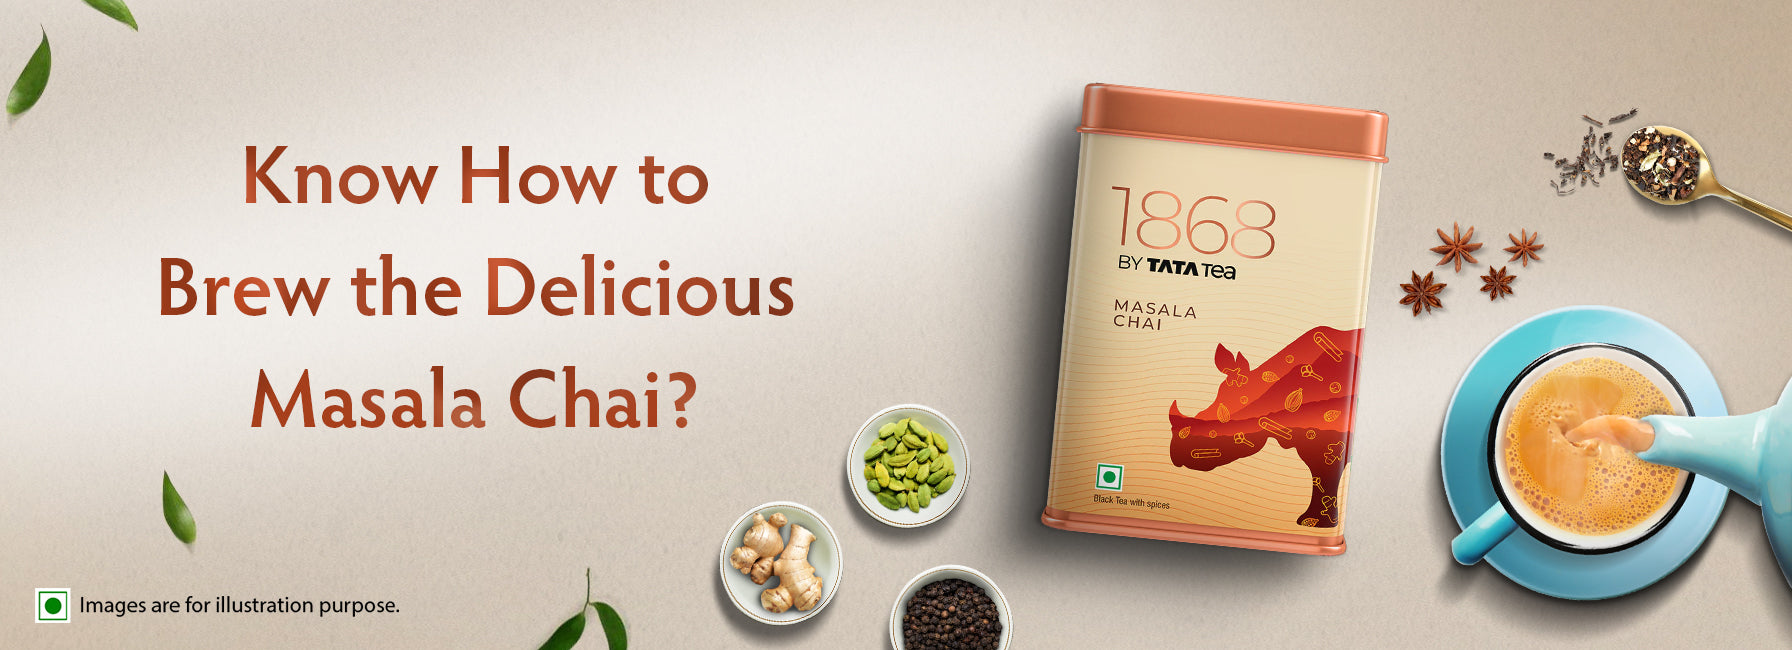 Know How to Brew the Delicious Masala Chai?